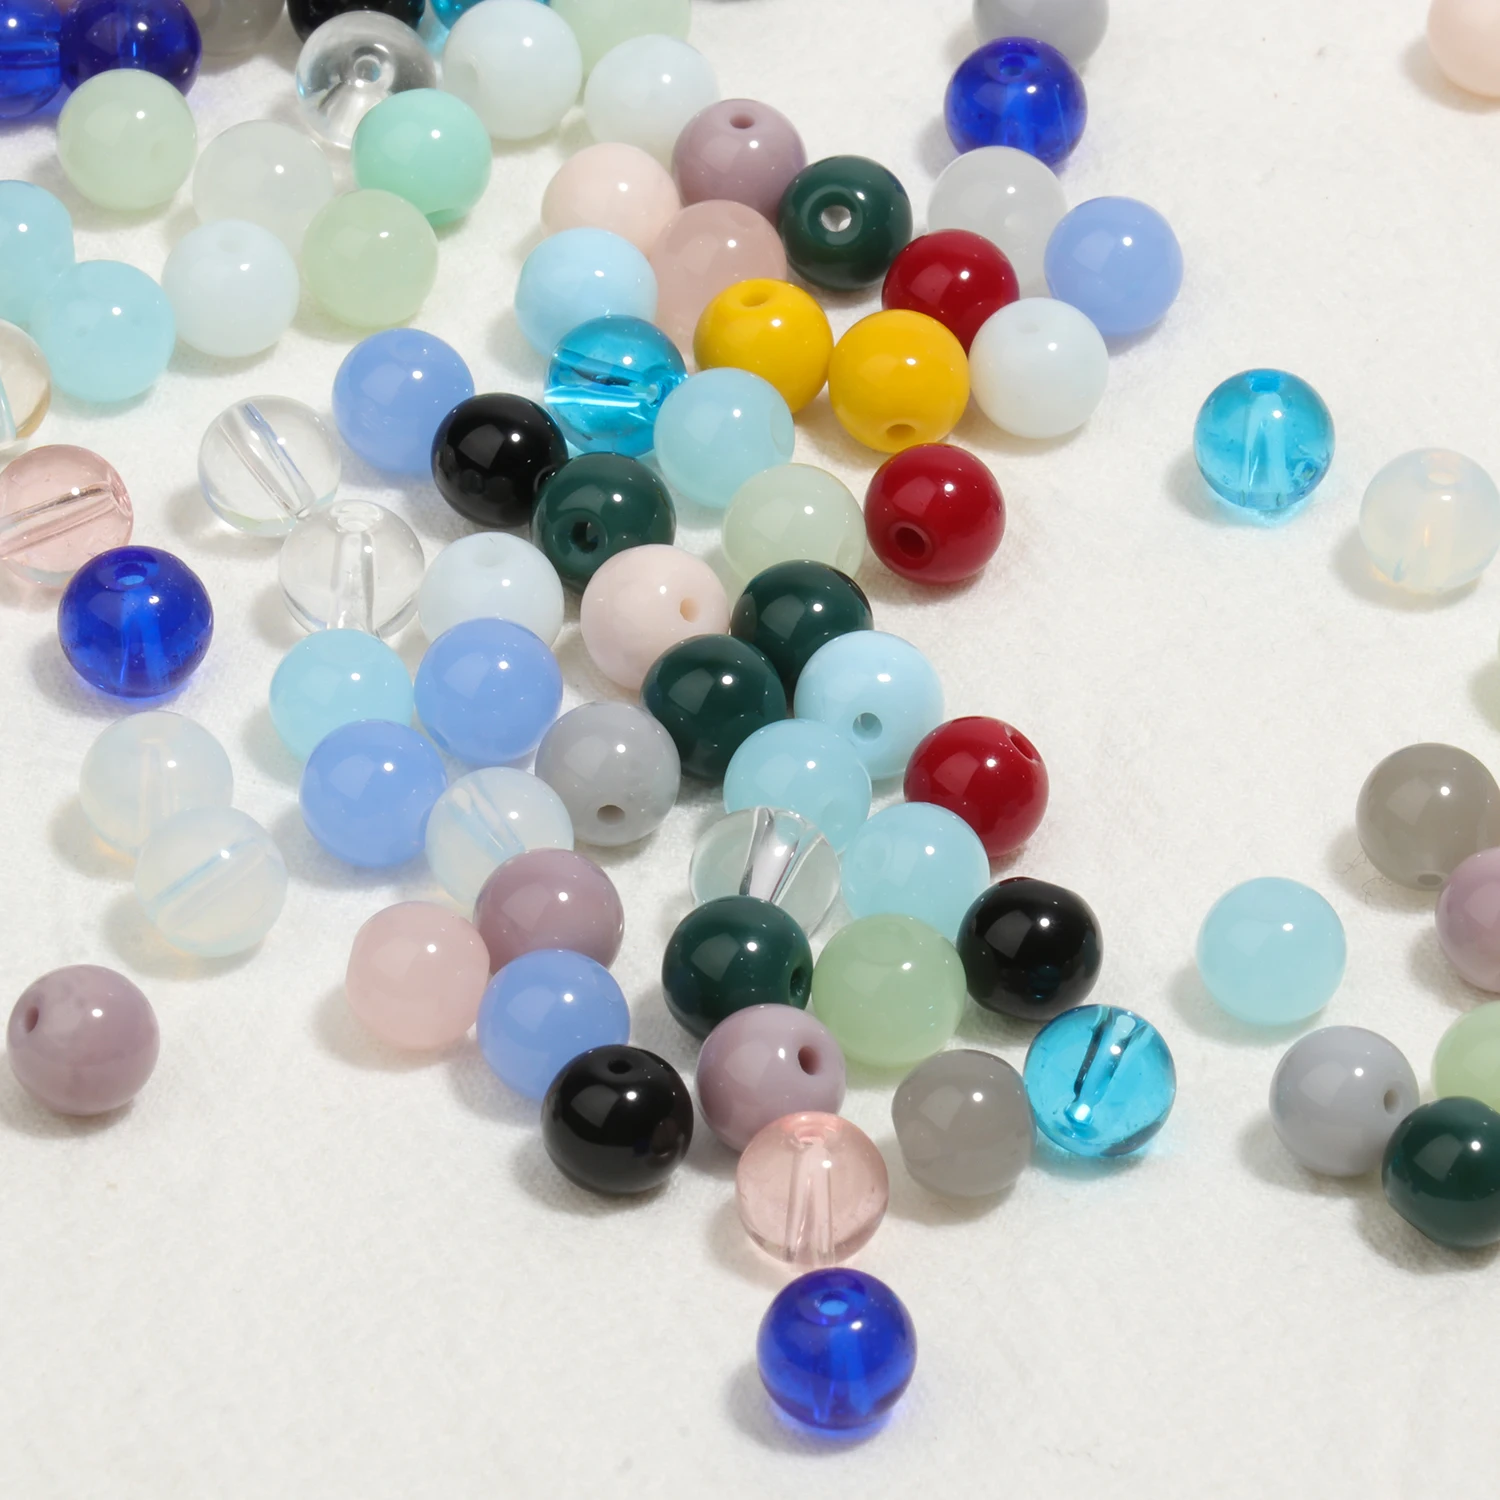 50 pieces/lot 8mm AB Color Round Glass Beads Loose Spacer beaded beads For  Jewelry Making bracelet pendant necklace earrings DIY - AliExpress